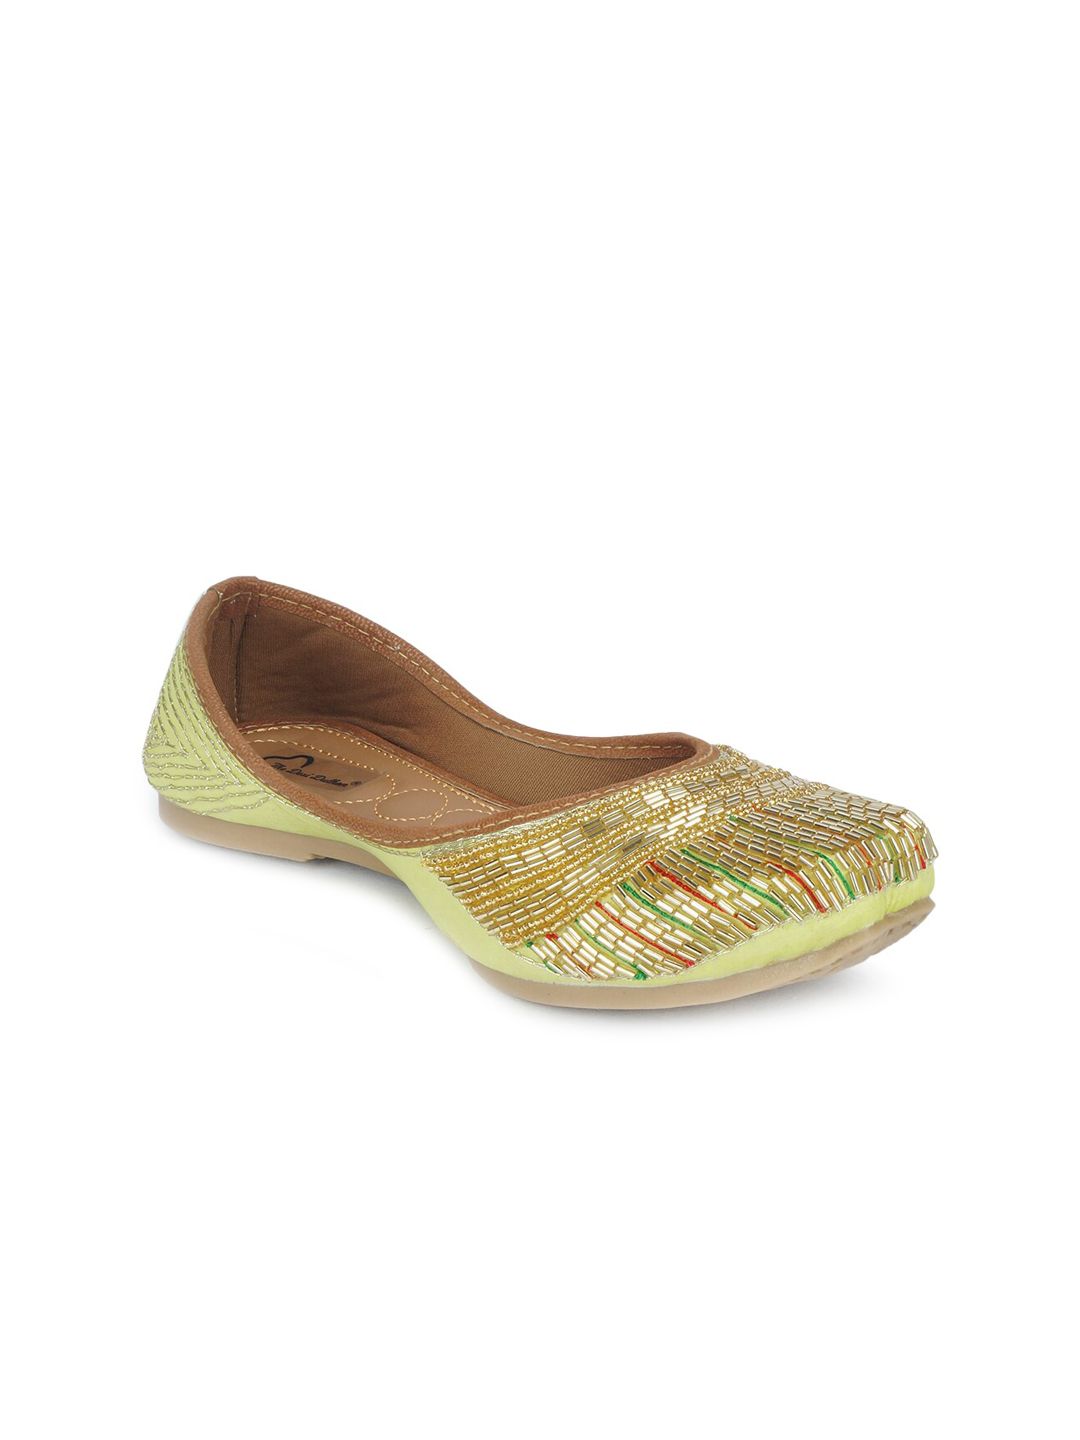 The Desi Dulhan Women Green Ballerinas Flats With Ethnic Embellishments Price in India